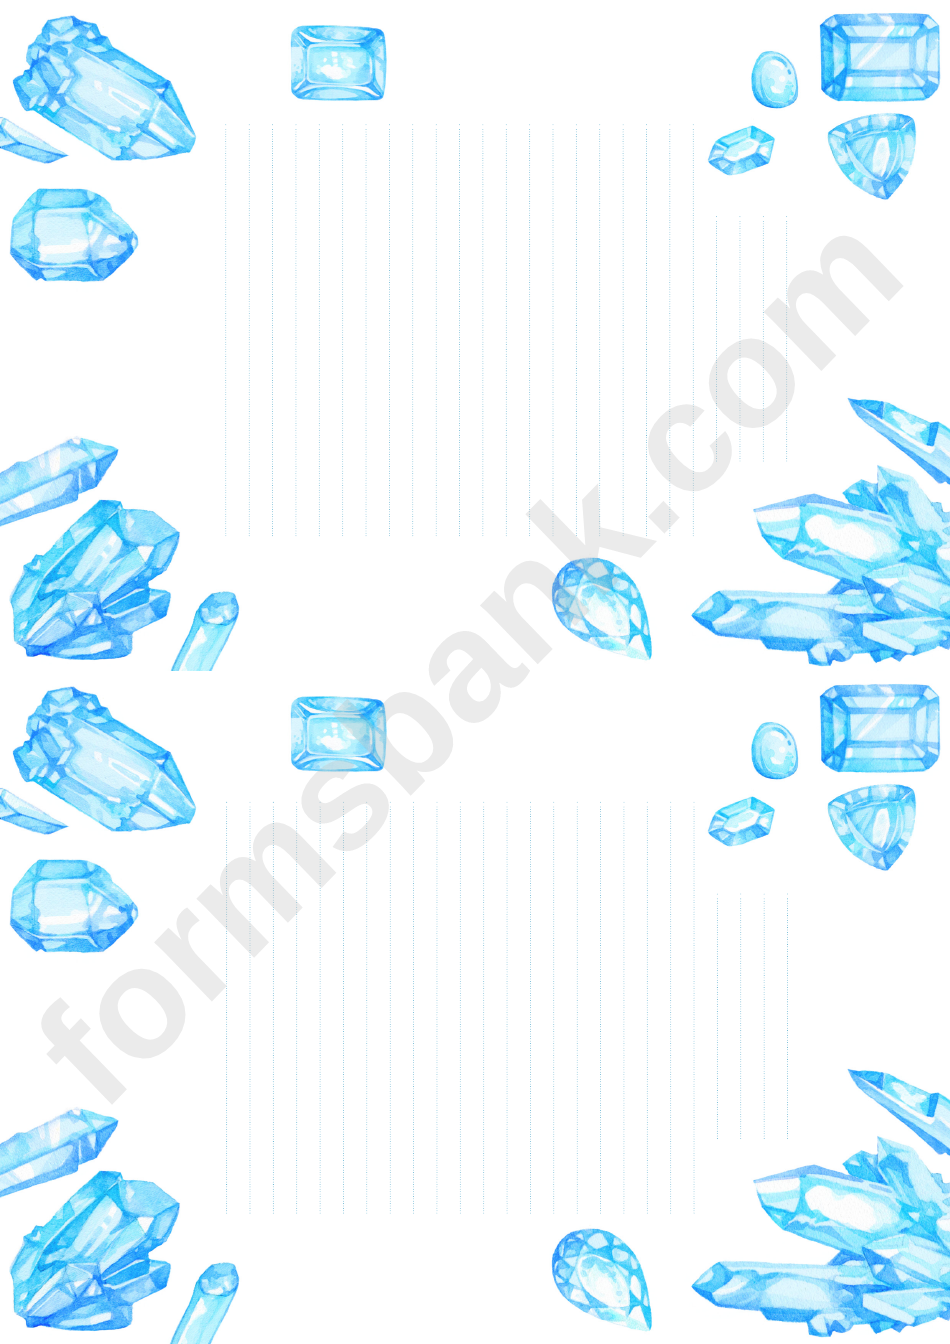 Lined Paper With Blue Crystal Borders